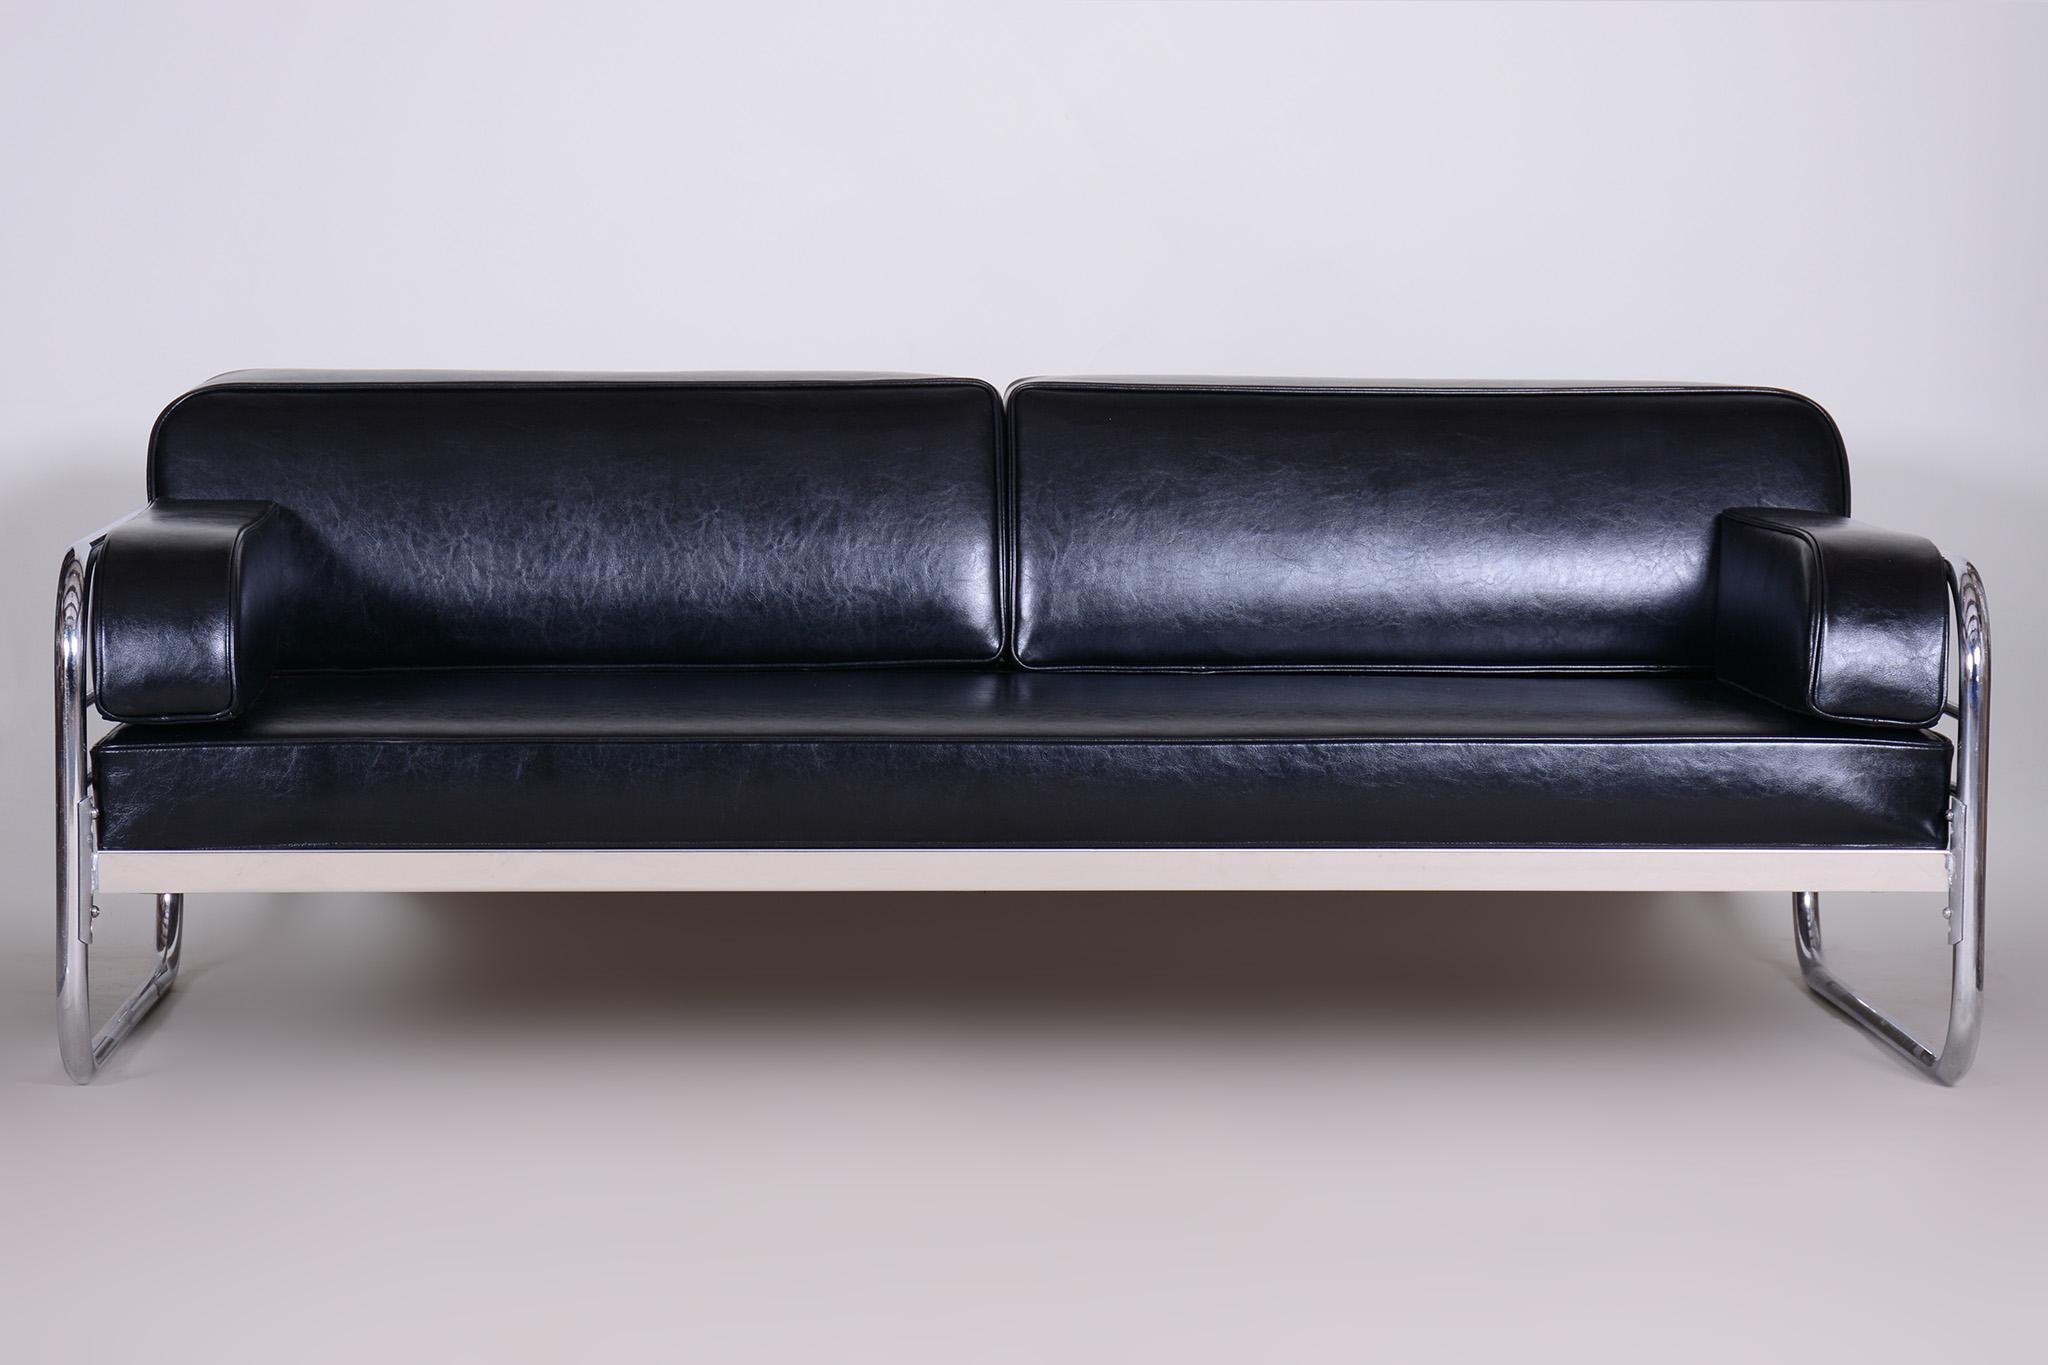 Bauhaus style sofa with chrome-plated steel tubular frame.
Manufactured by Hynek Gottwald in the 1930s.
Chrome tubular steel is in perfect original condition.
New upholstery
Source: Czechia (Czechoslovakia).